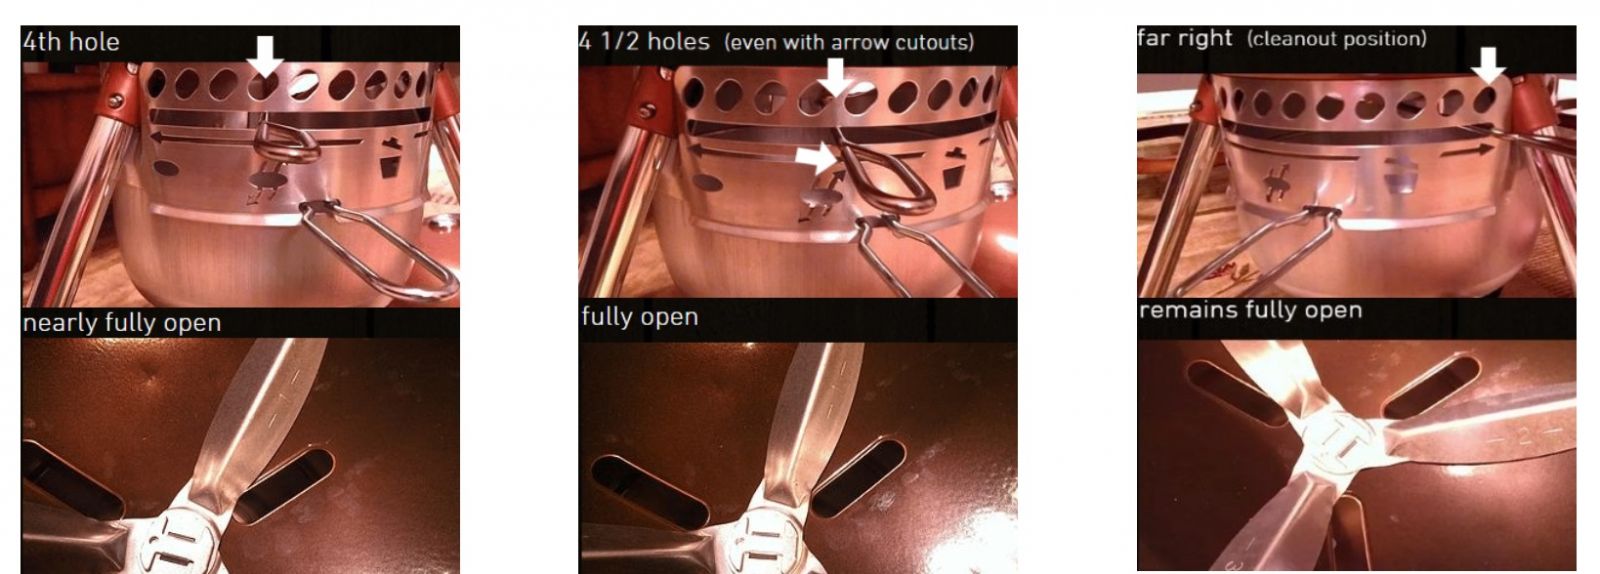 This is a picture that show the air vent opening to be used as a guide for better Weber BBQ Temperature control during long low and slow cooks